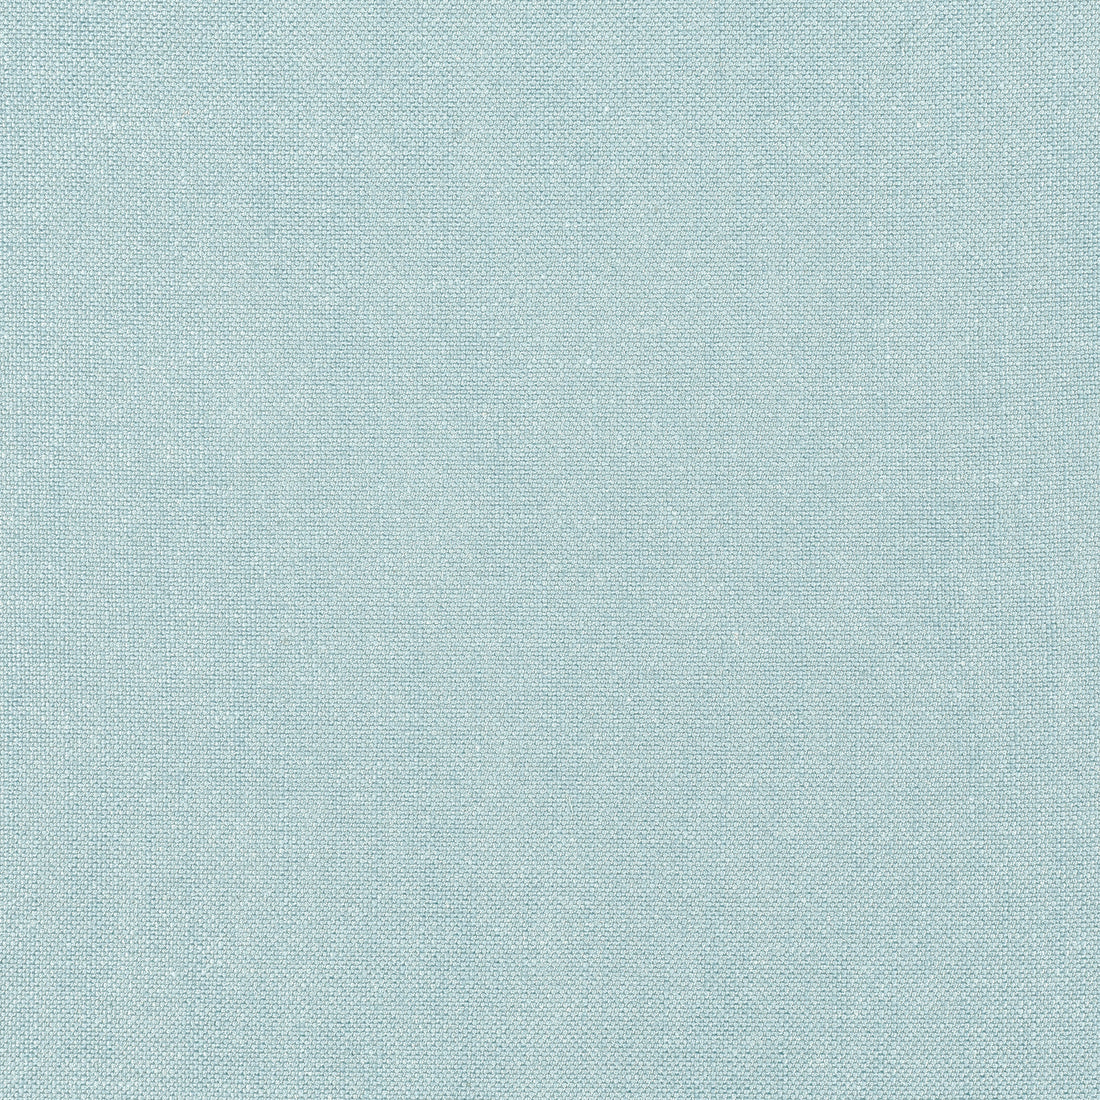 Palisade Linen fabric in sky color - pattern number FWW7646 - by Thibaut in the Palisades collection